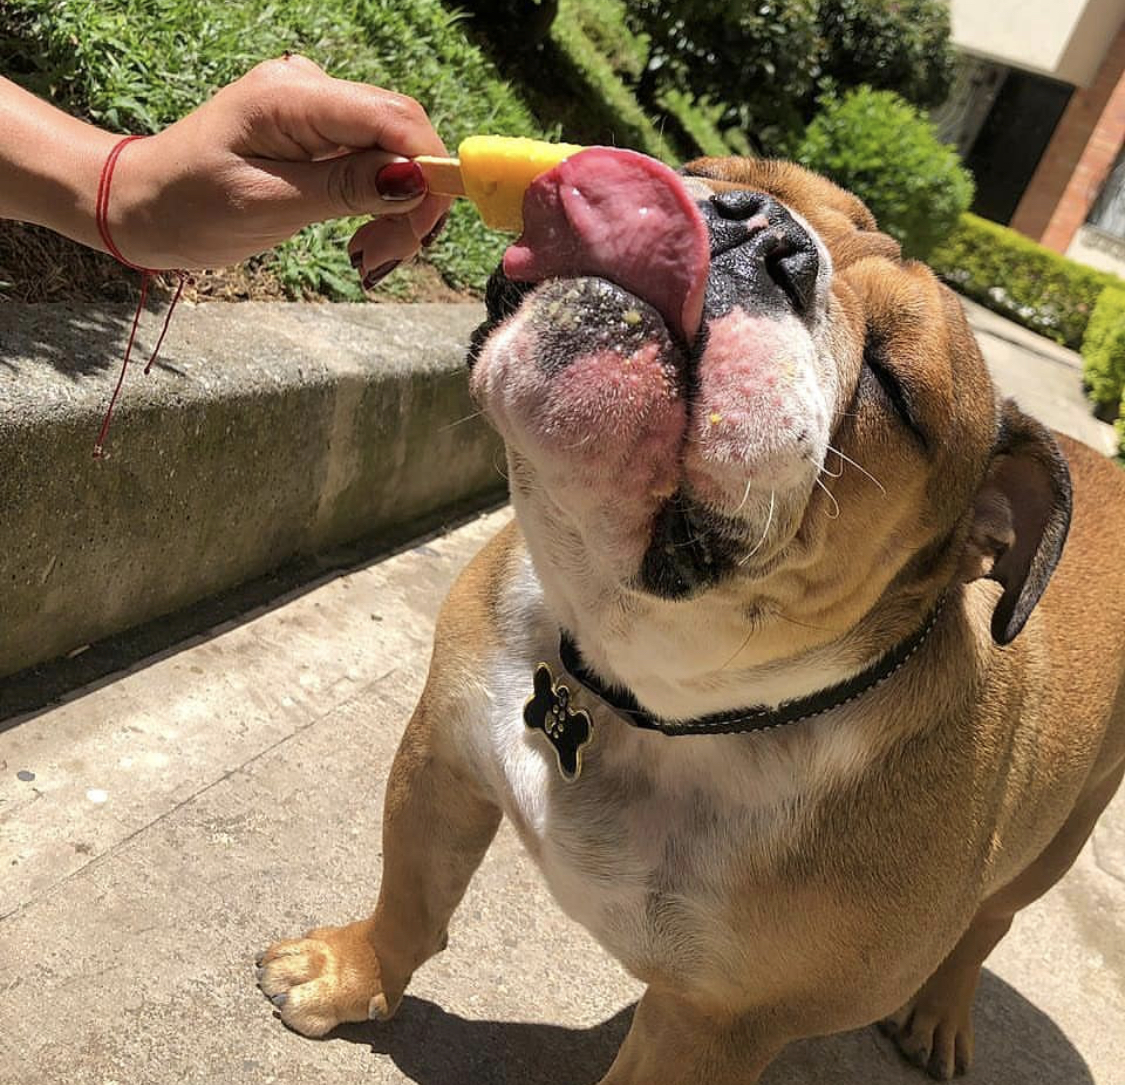 A English Bulldog at the park licking a popsicle